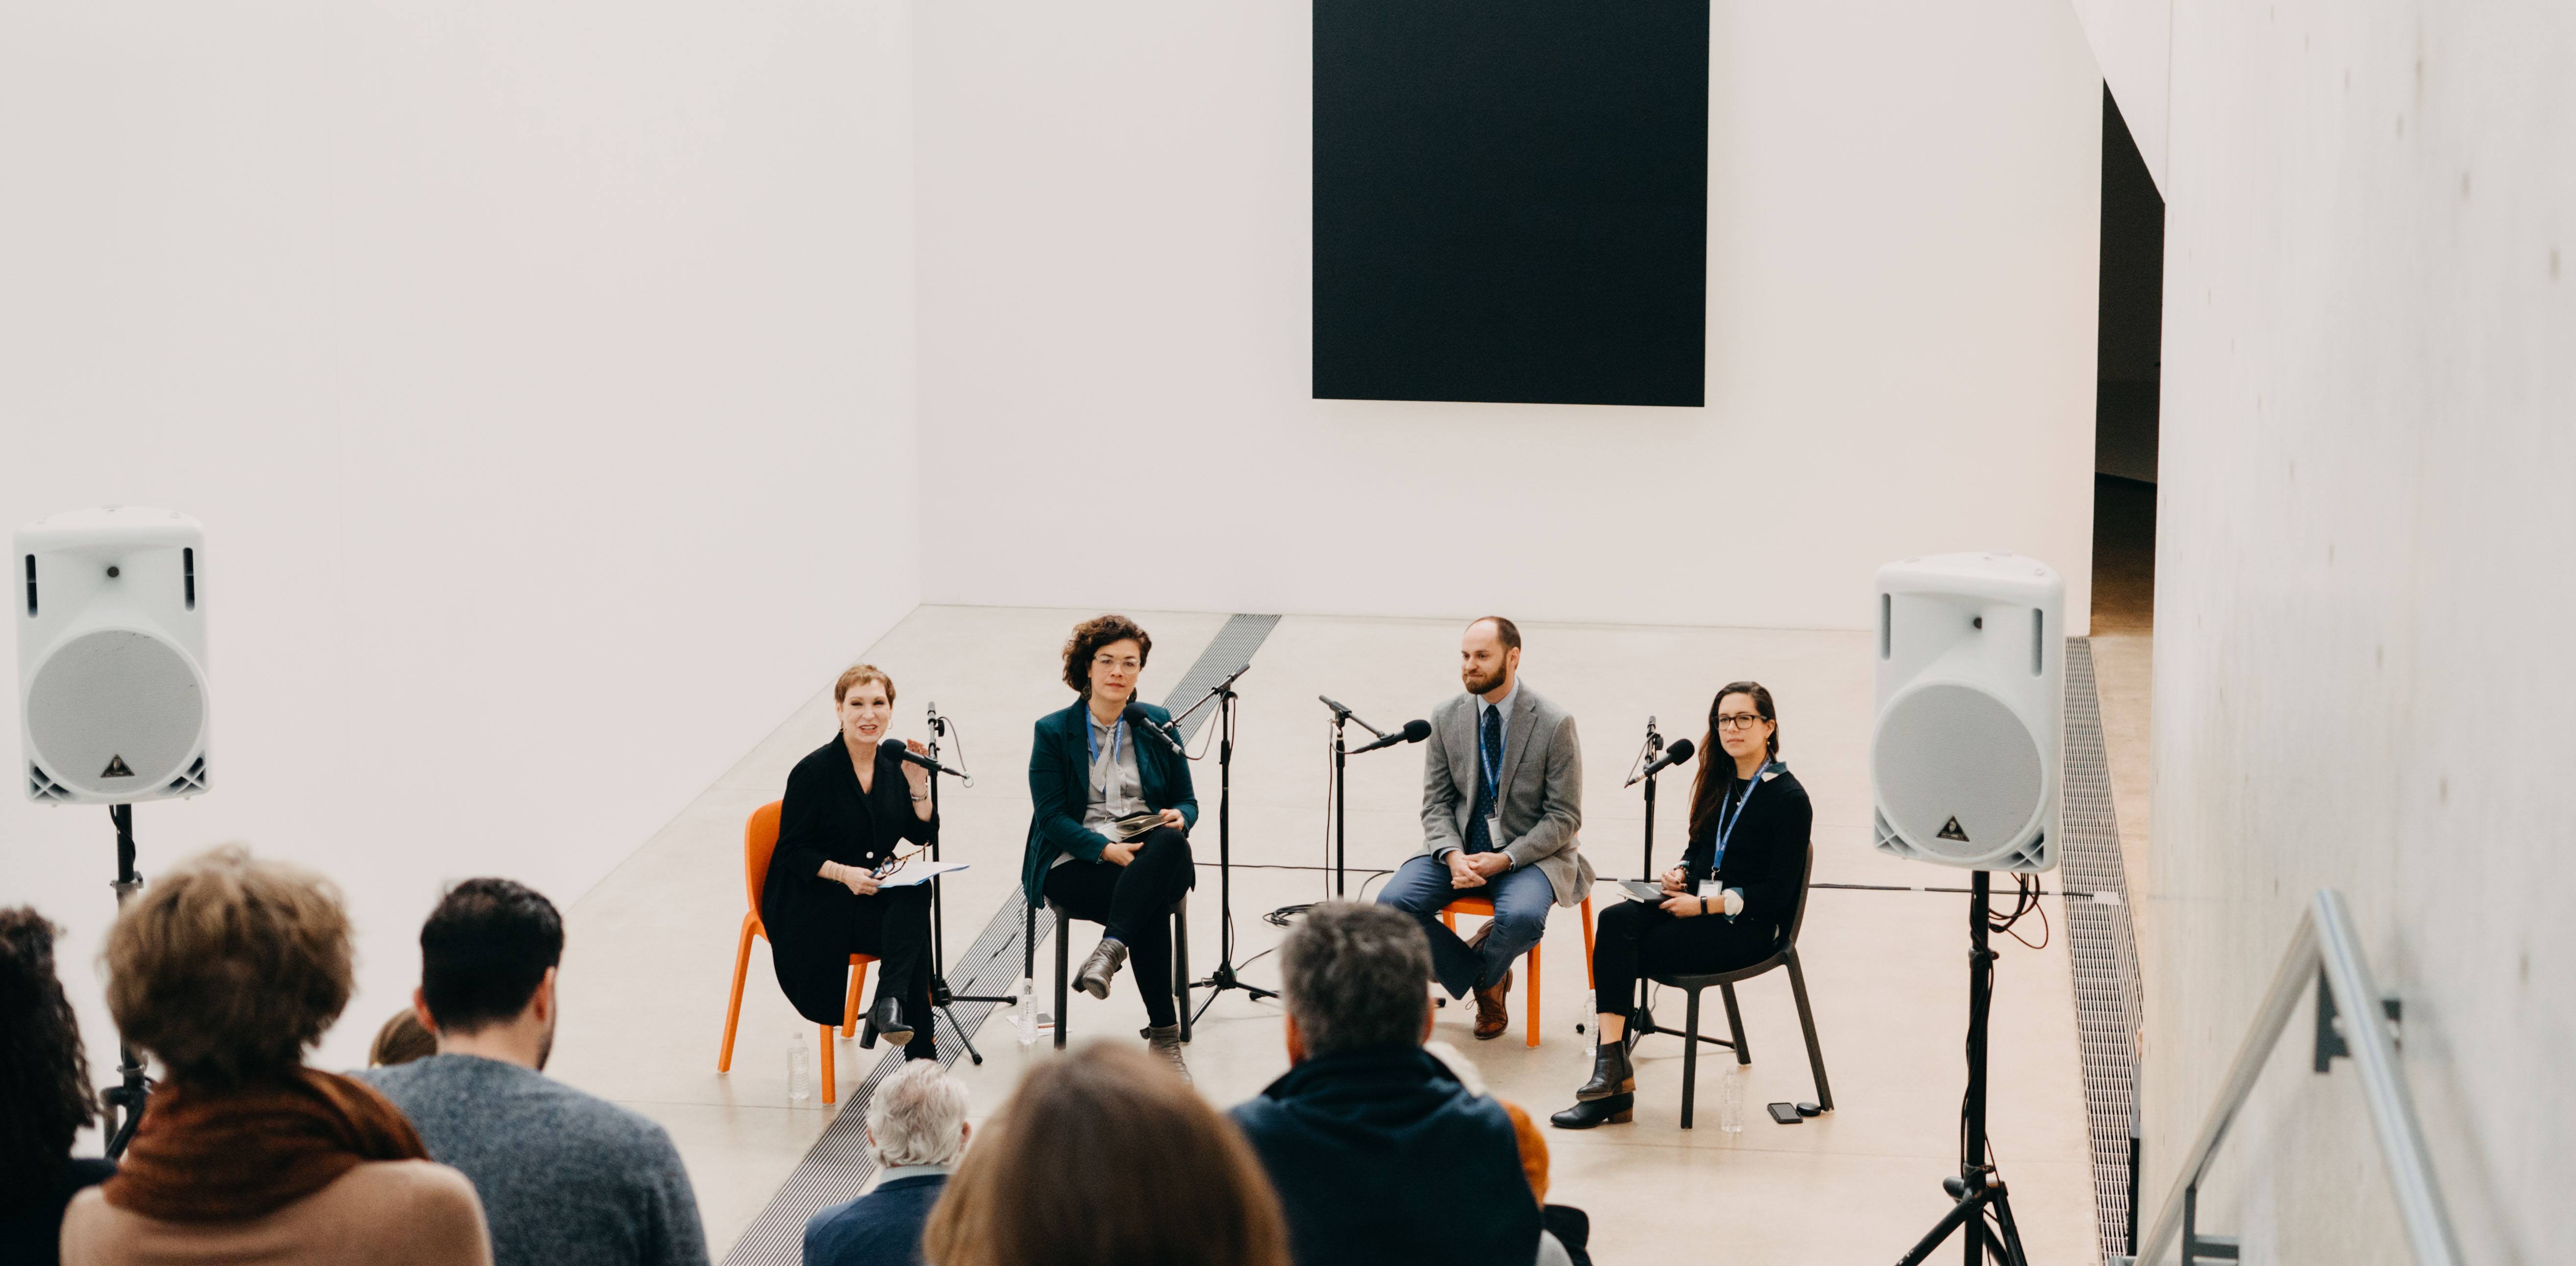 Colby Heckendorn, Miriam Ruiz, Sue Bell Yank, and moderator Roseann Weiss sit in the Lower Main Gallery and speak to the audience on the Main Staircase.